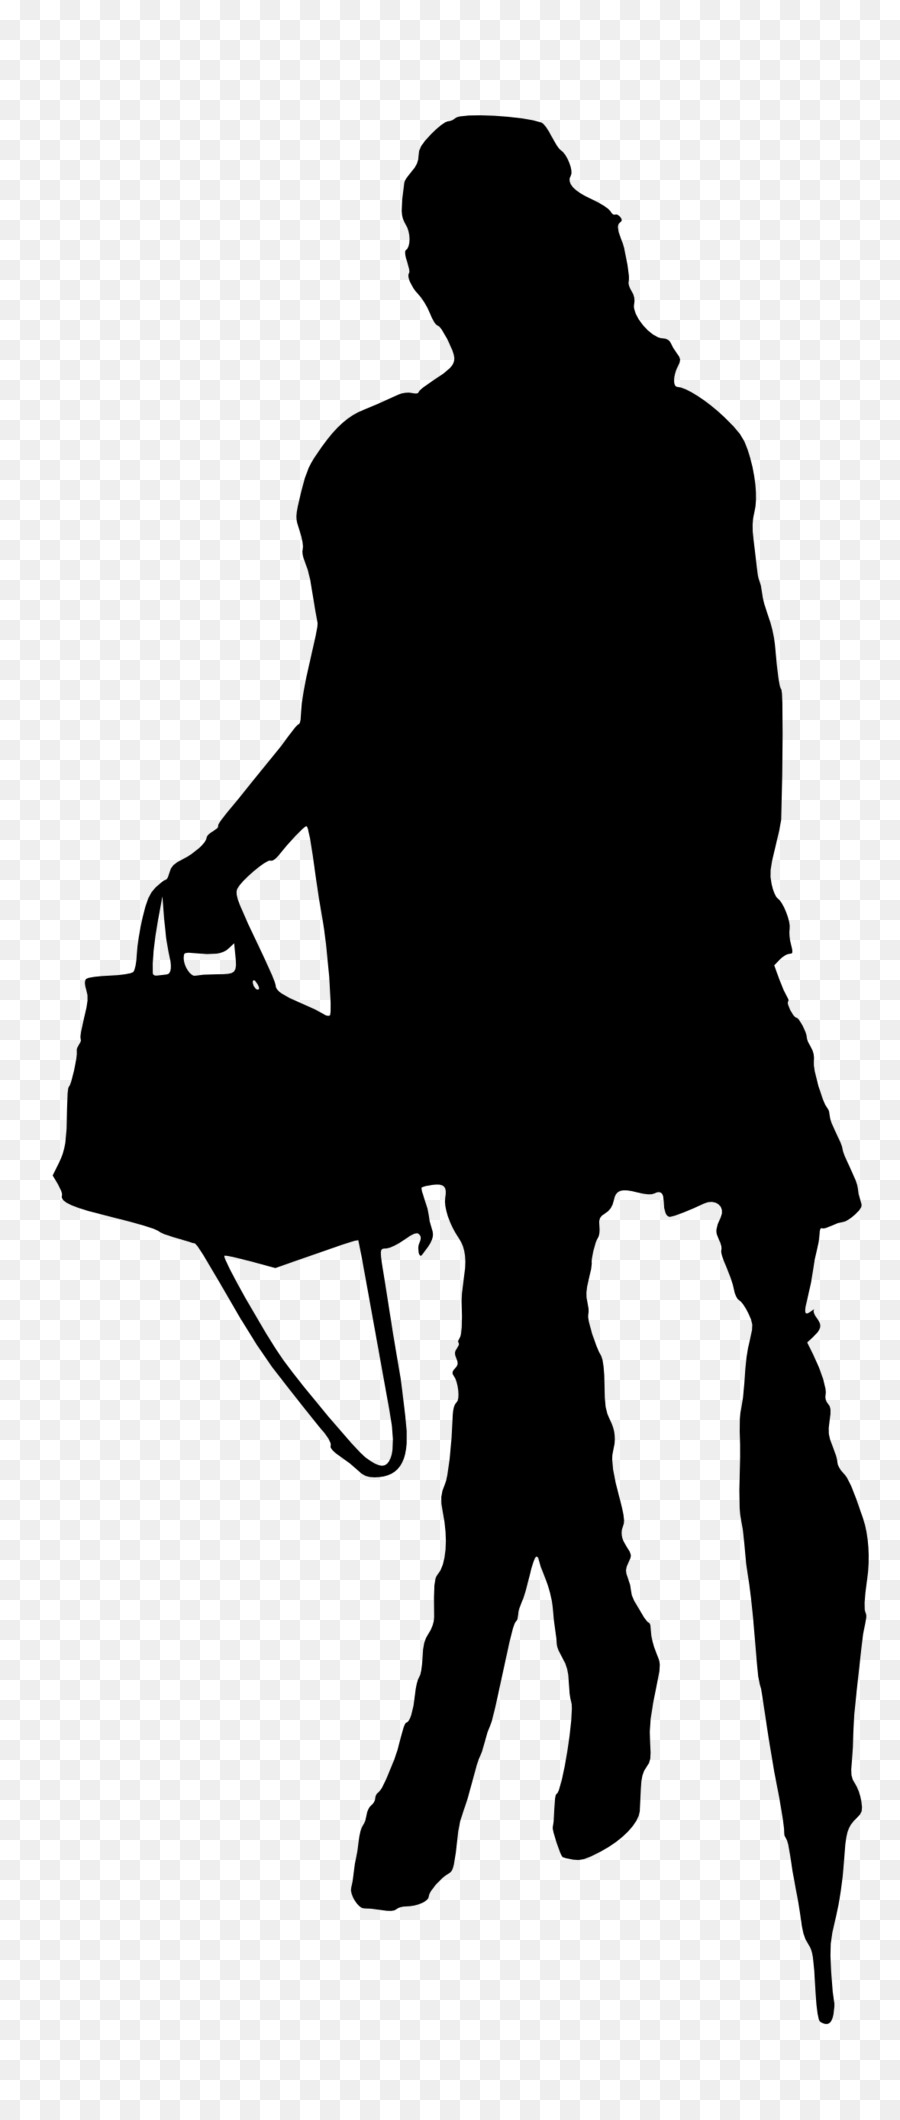 Silhouette Monochrome photography Black and white Female - woman silhouette png download - 1179*2757 - Free Transparent Silhouette png Download.